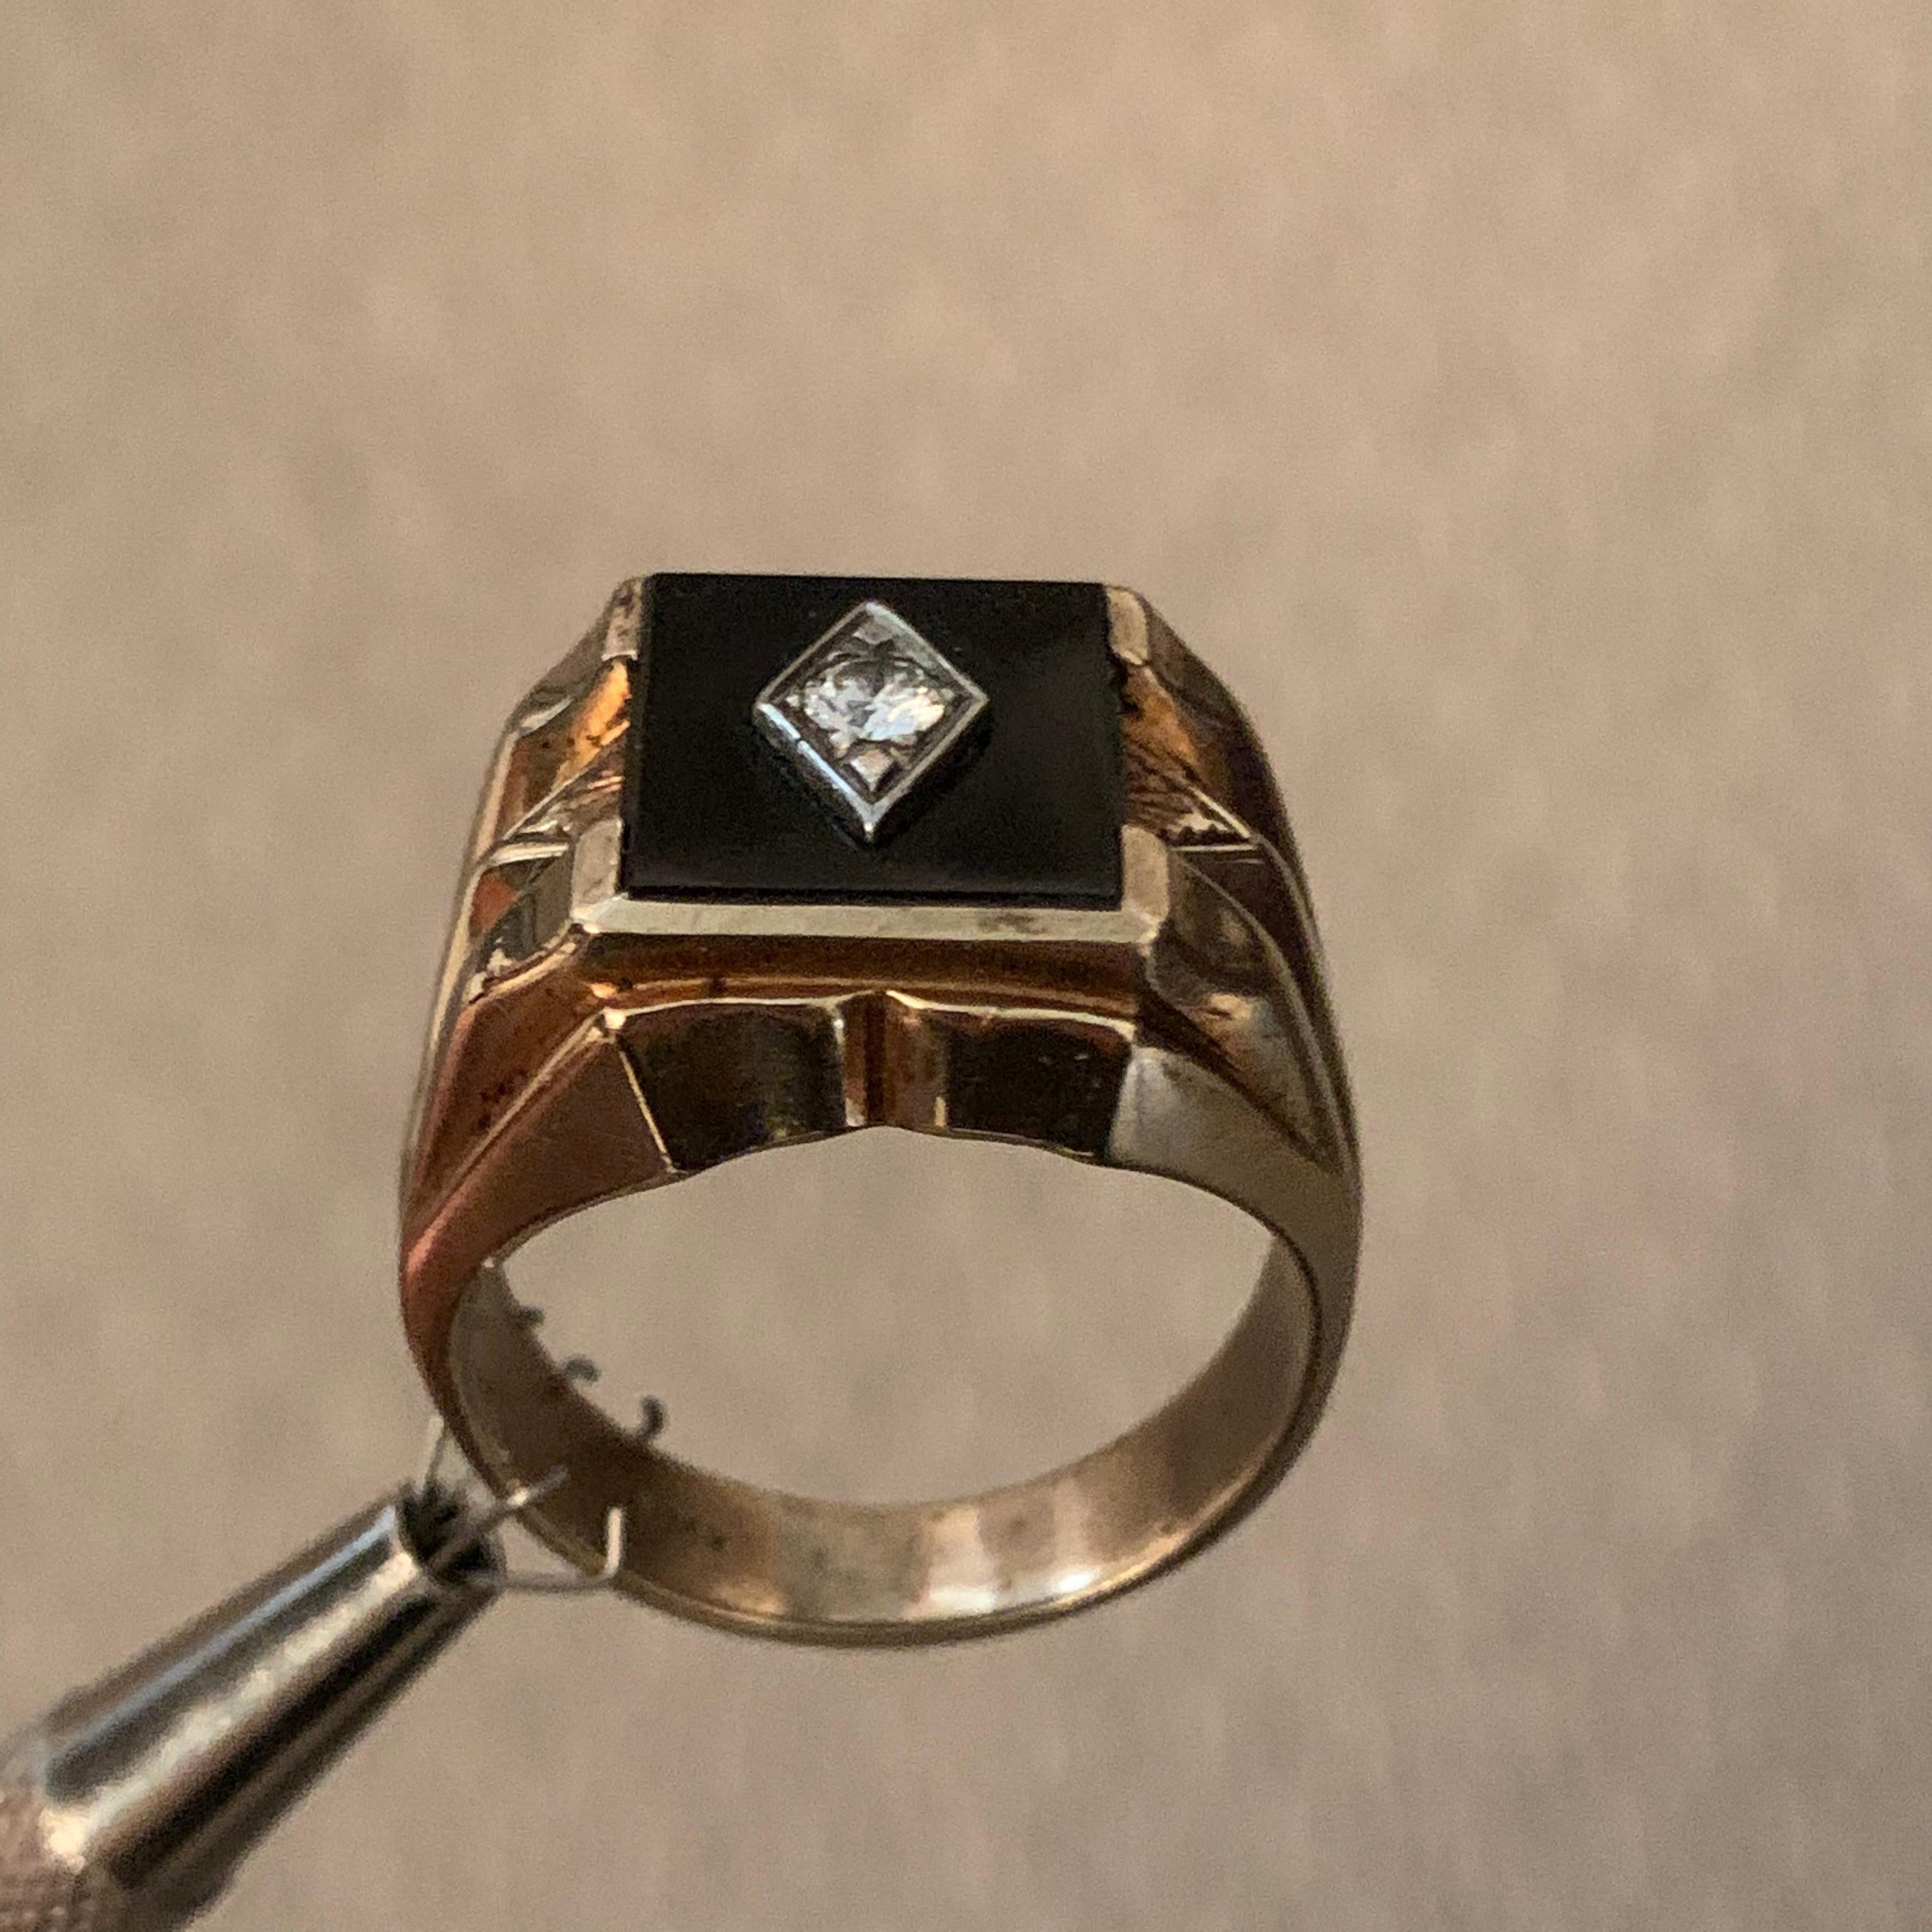 Onyx and Diamond RIng, 3.5mm Diamond

Size 11.75 Finger Size can be sized



 